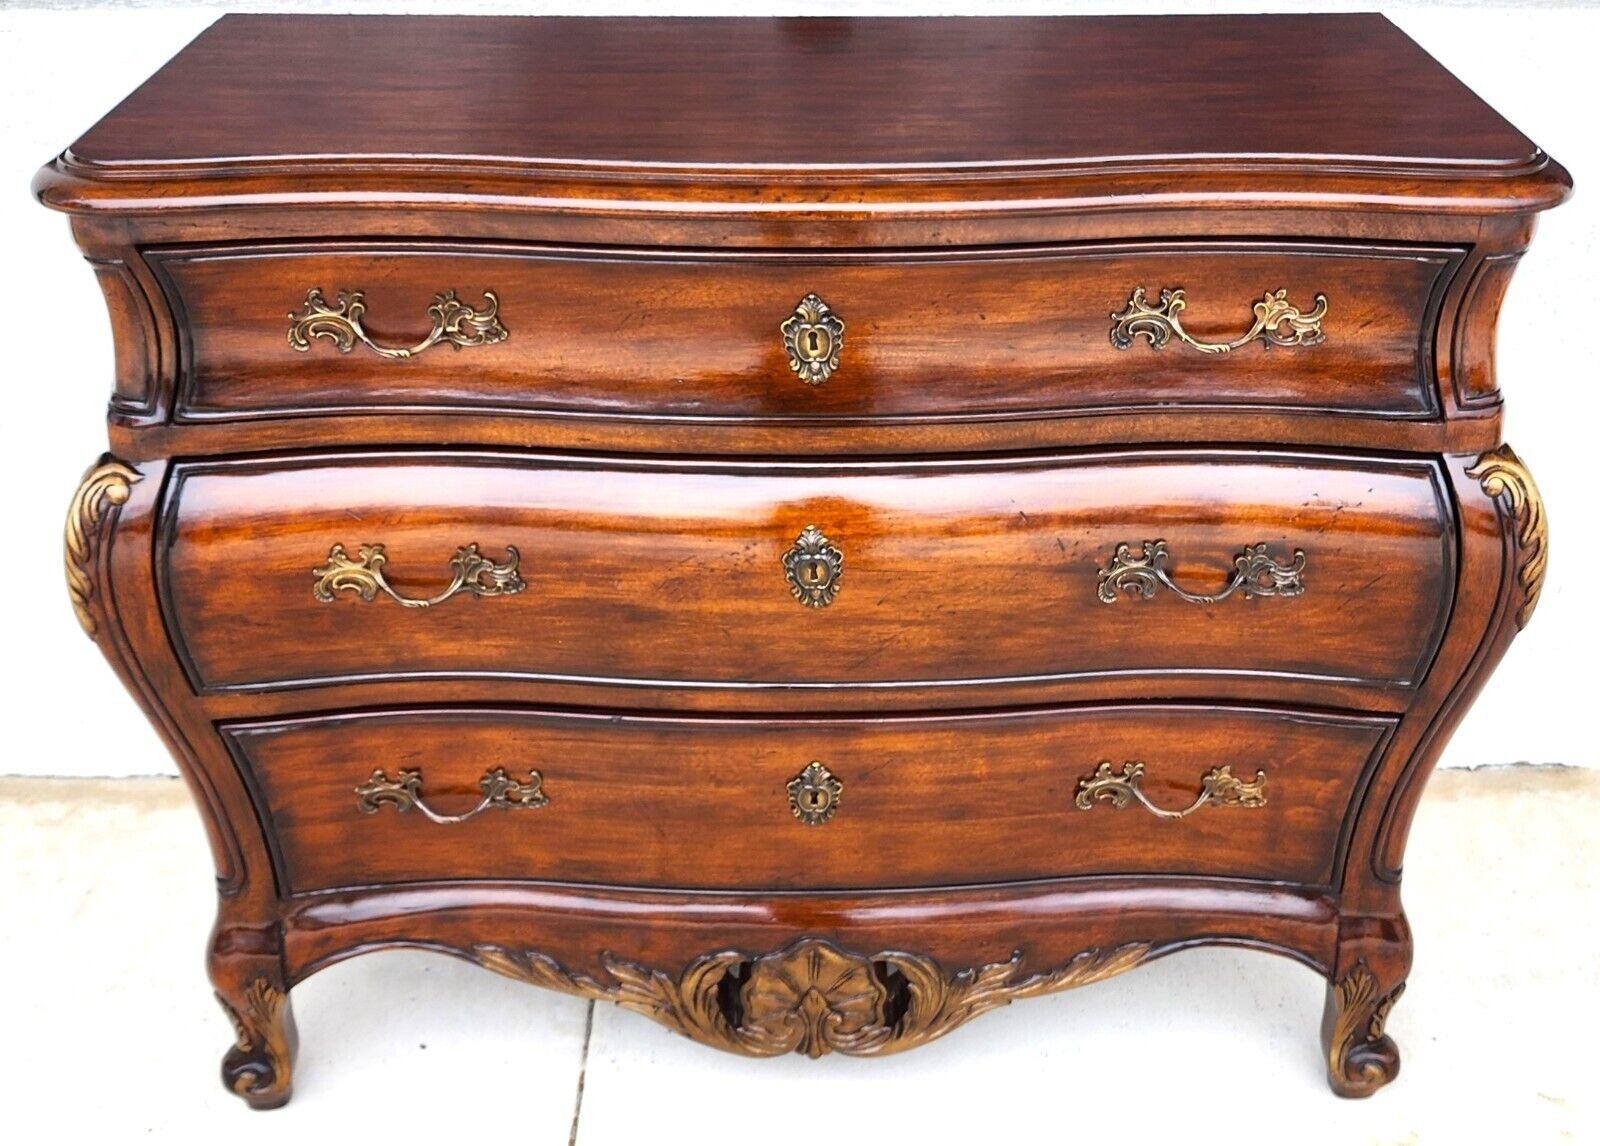 For FULL item description click on CONTINUE READING at the bottom of this page.

Offering One Of Our Recent Palm Beach Estate Fine Furniture Acquisitions Of A
Louis XV French Bombay Chest Dresser by HICKORY WHITE
Very solid, heavy and well-built